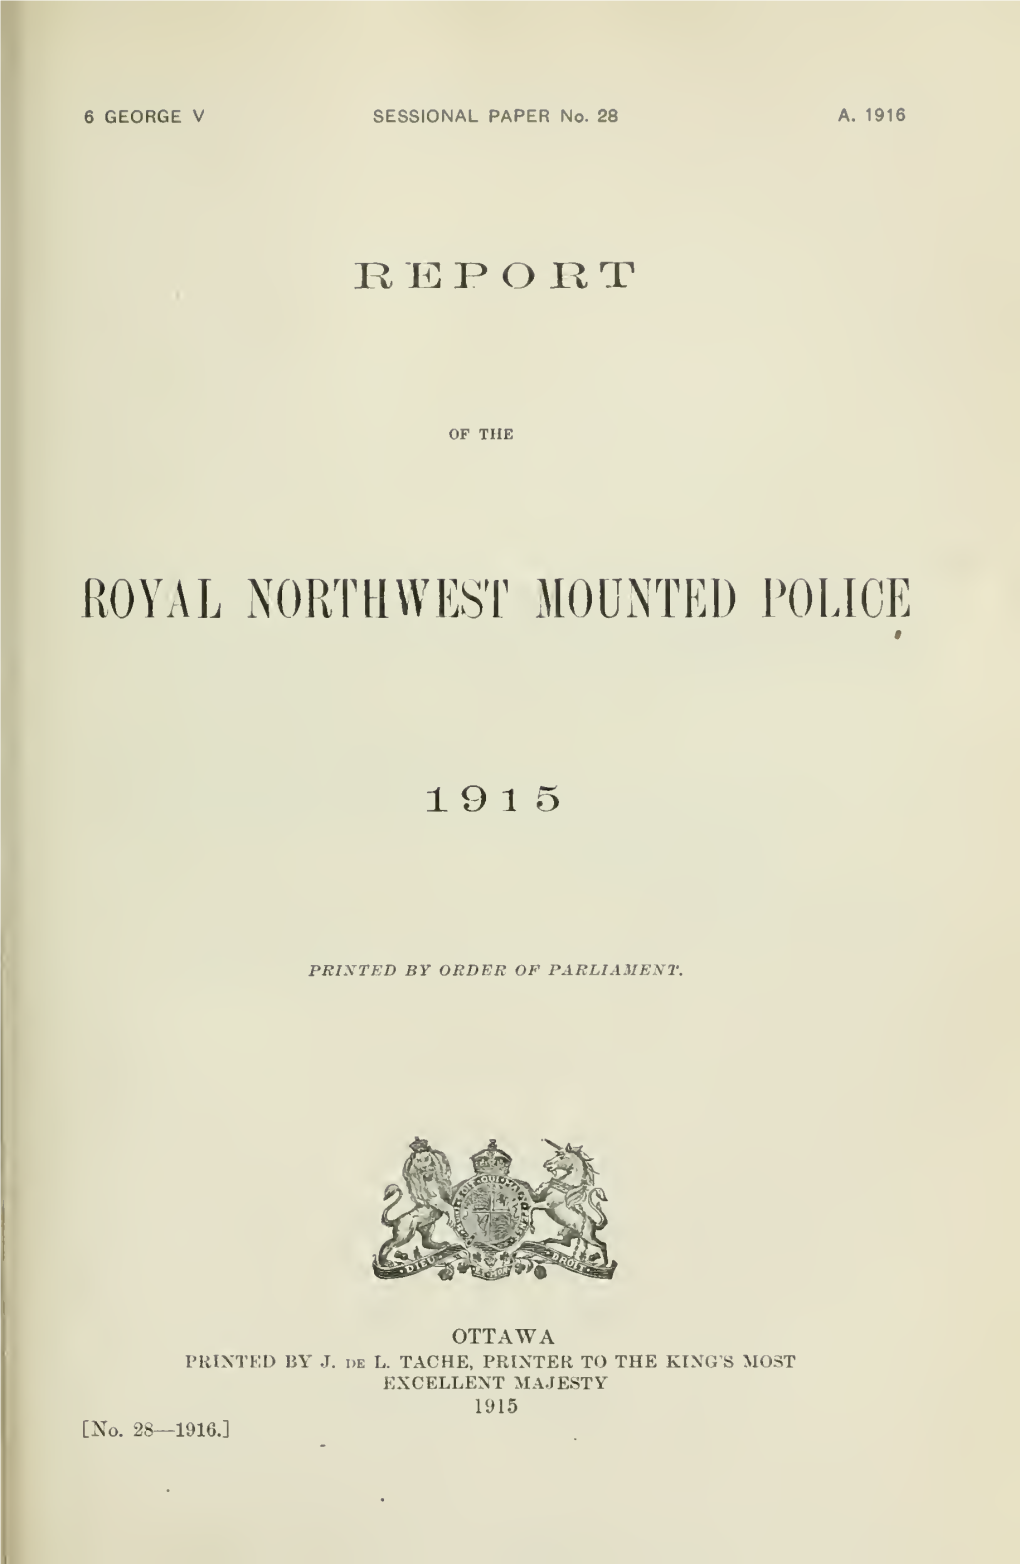 Report of the Royal Northwest Mounted Police, 1915